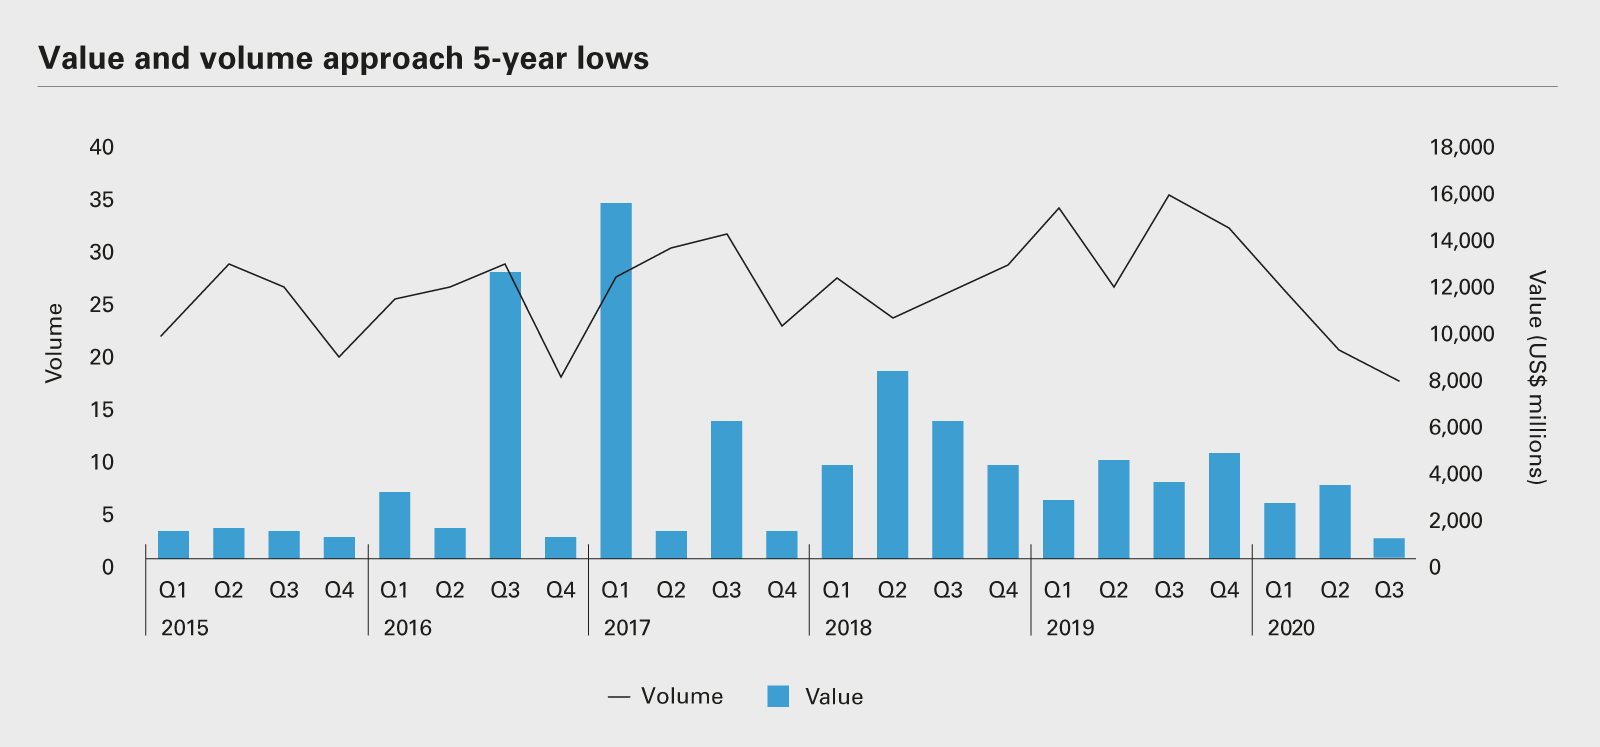 Value and volume approach 5-year lows (PDF)